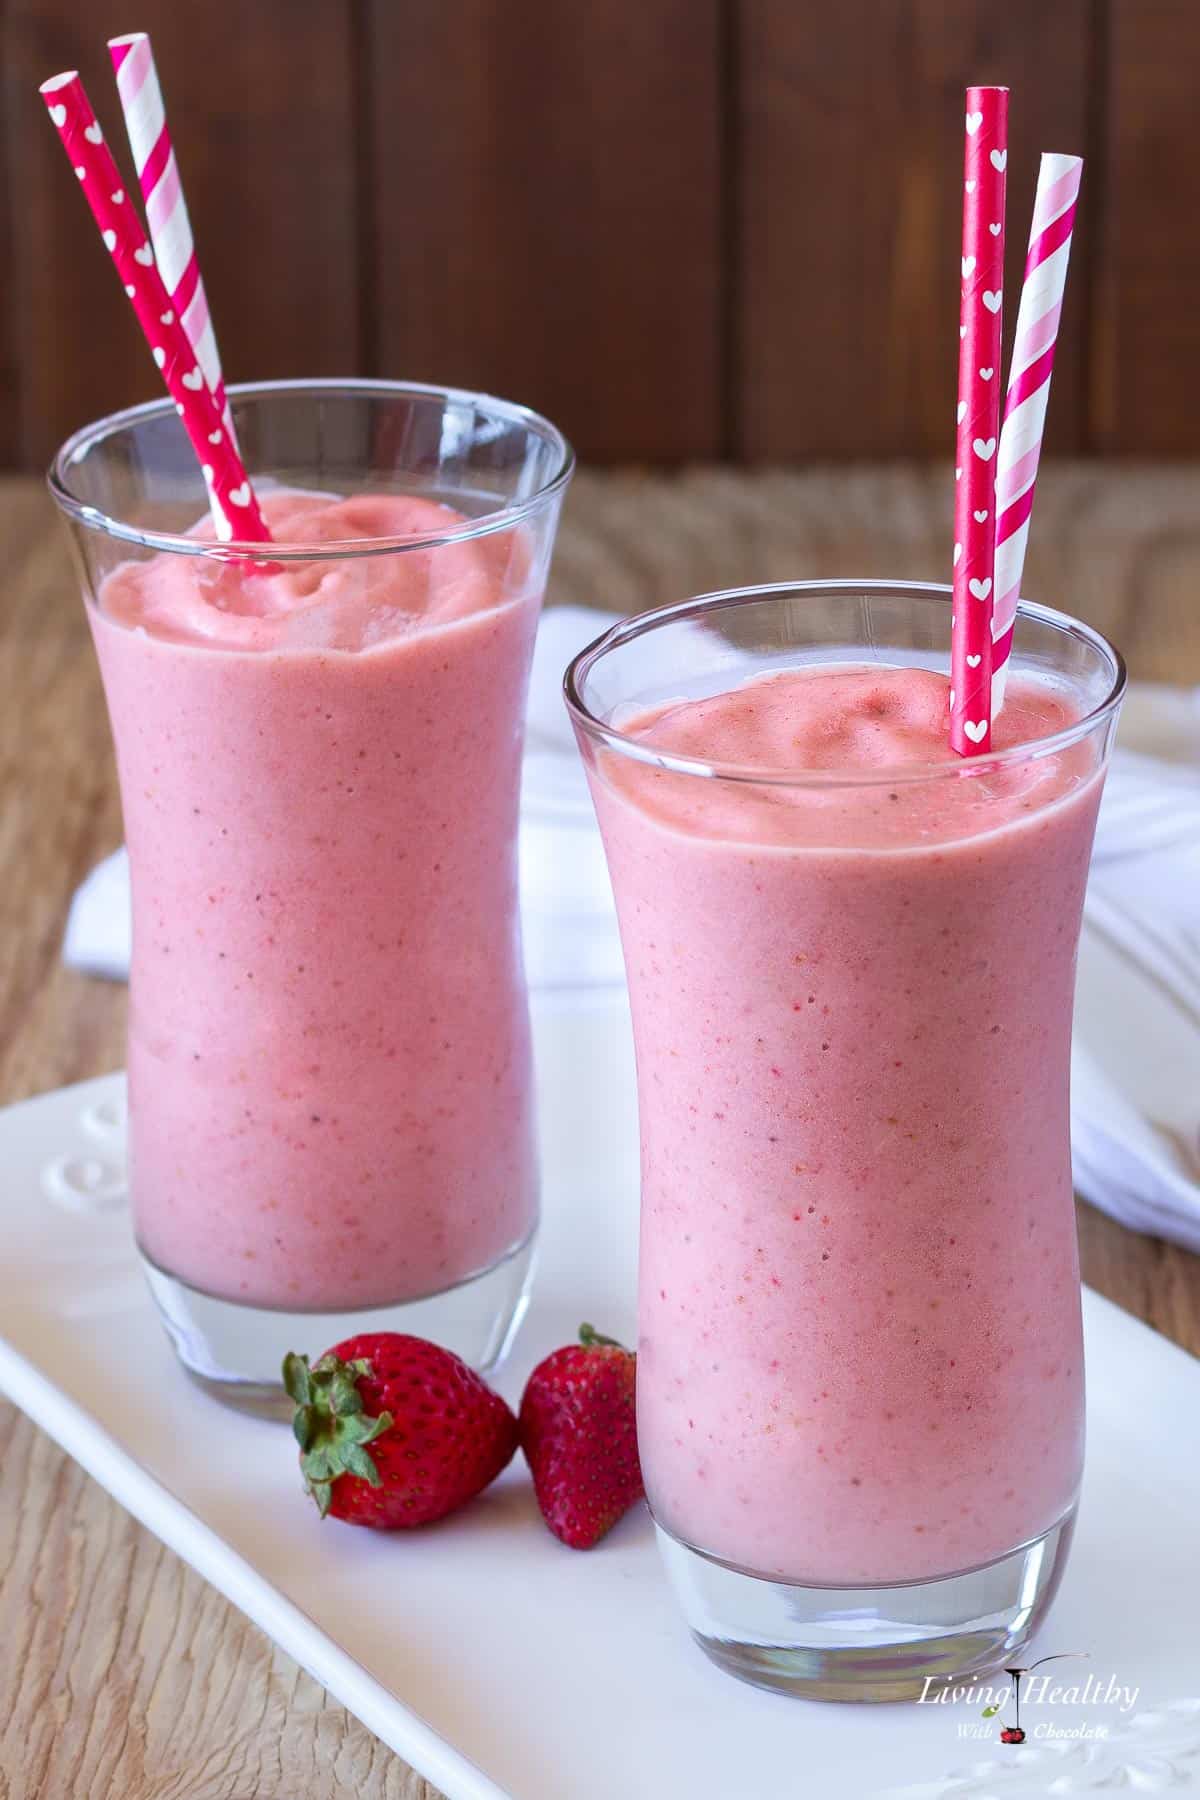 two glasses of strawberry milkshake with colorful red and white straws on a white rectangle plate with strawberries.